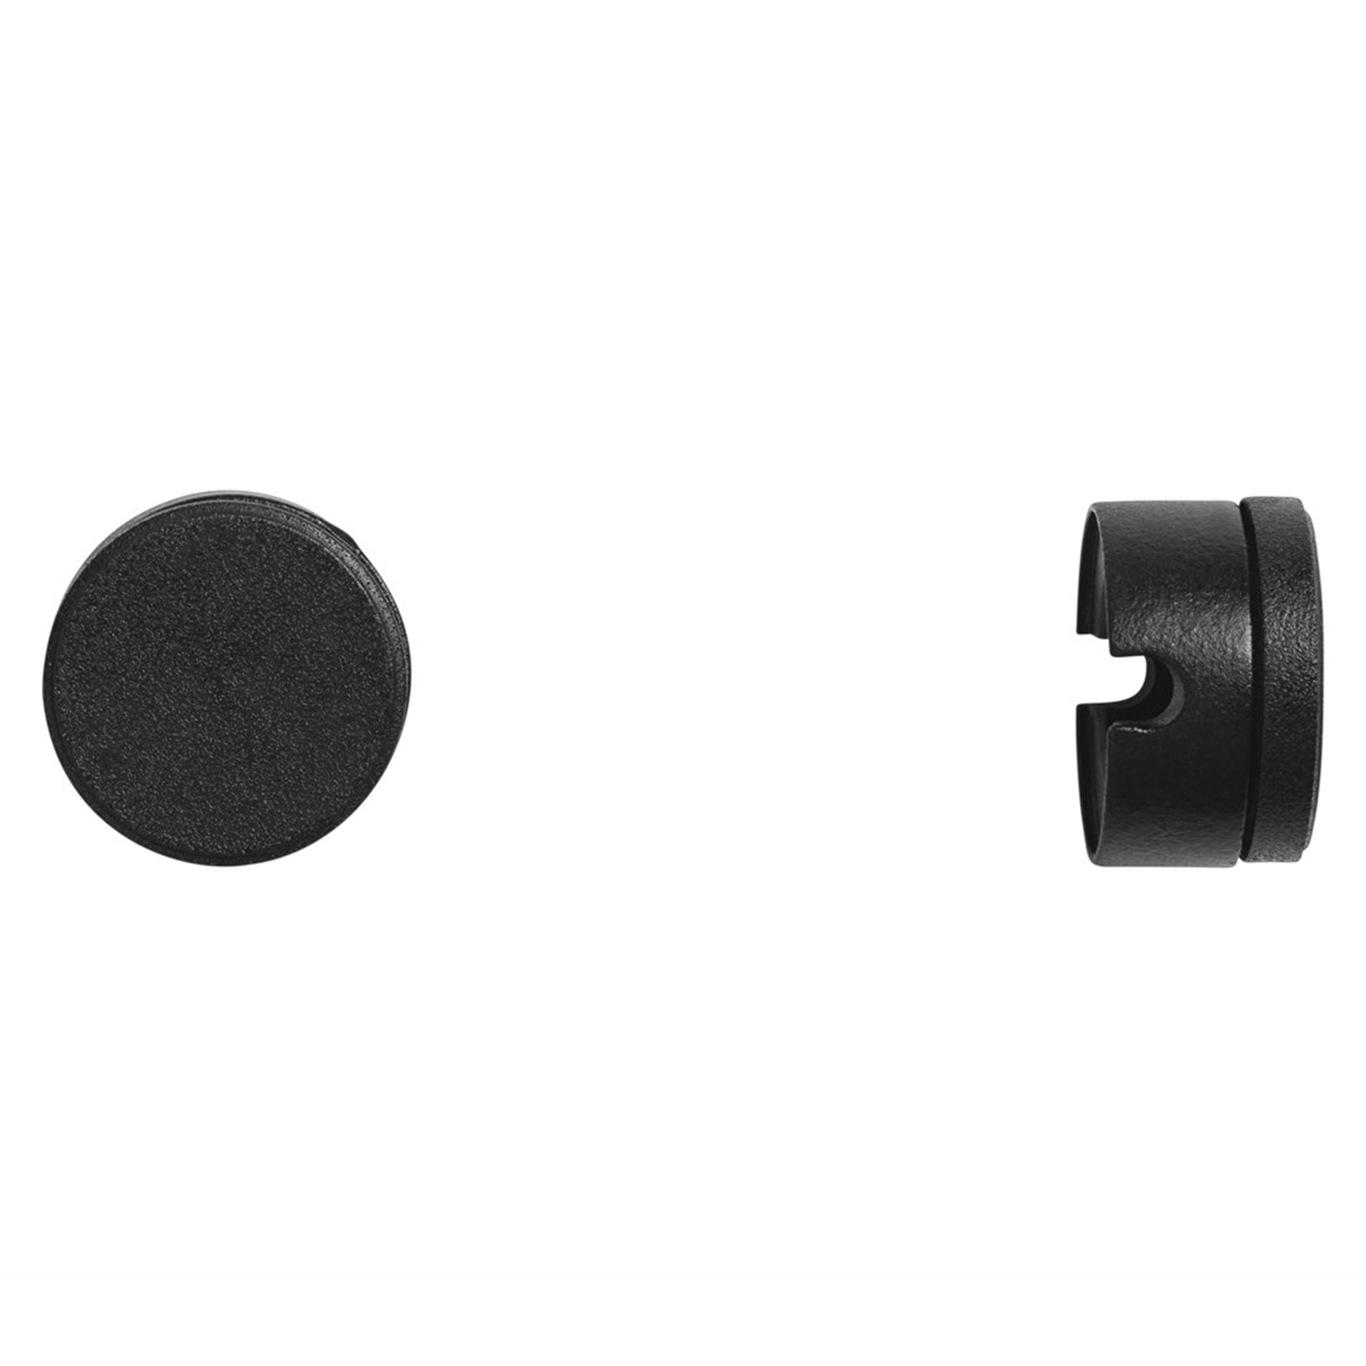 Post Extra Cabel Clips For Floor Lamp, Black